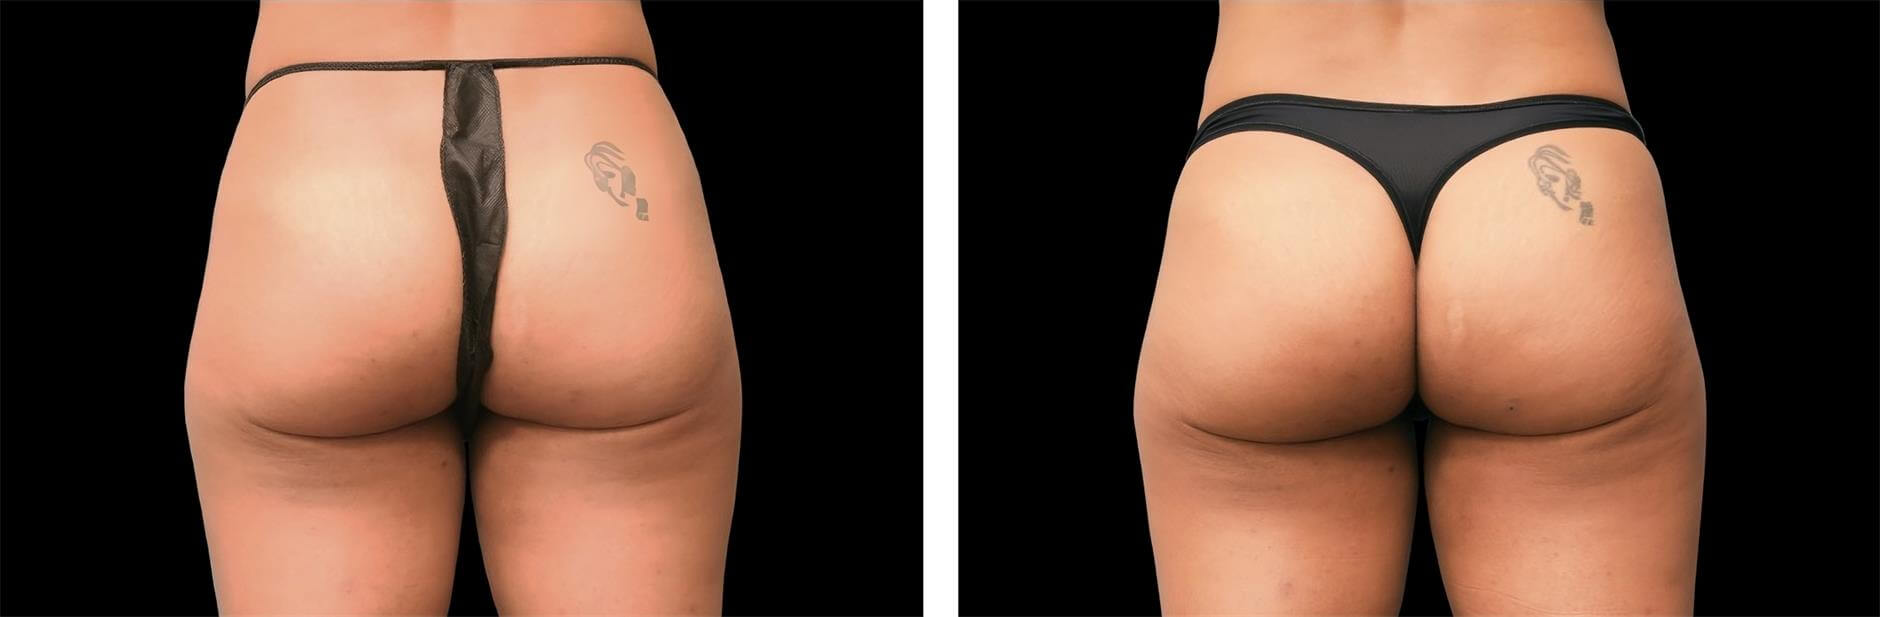 EMSculpt buttrocks before and after image 03